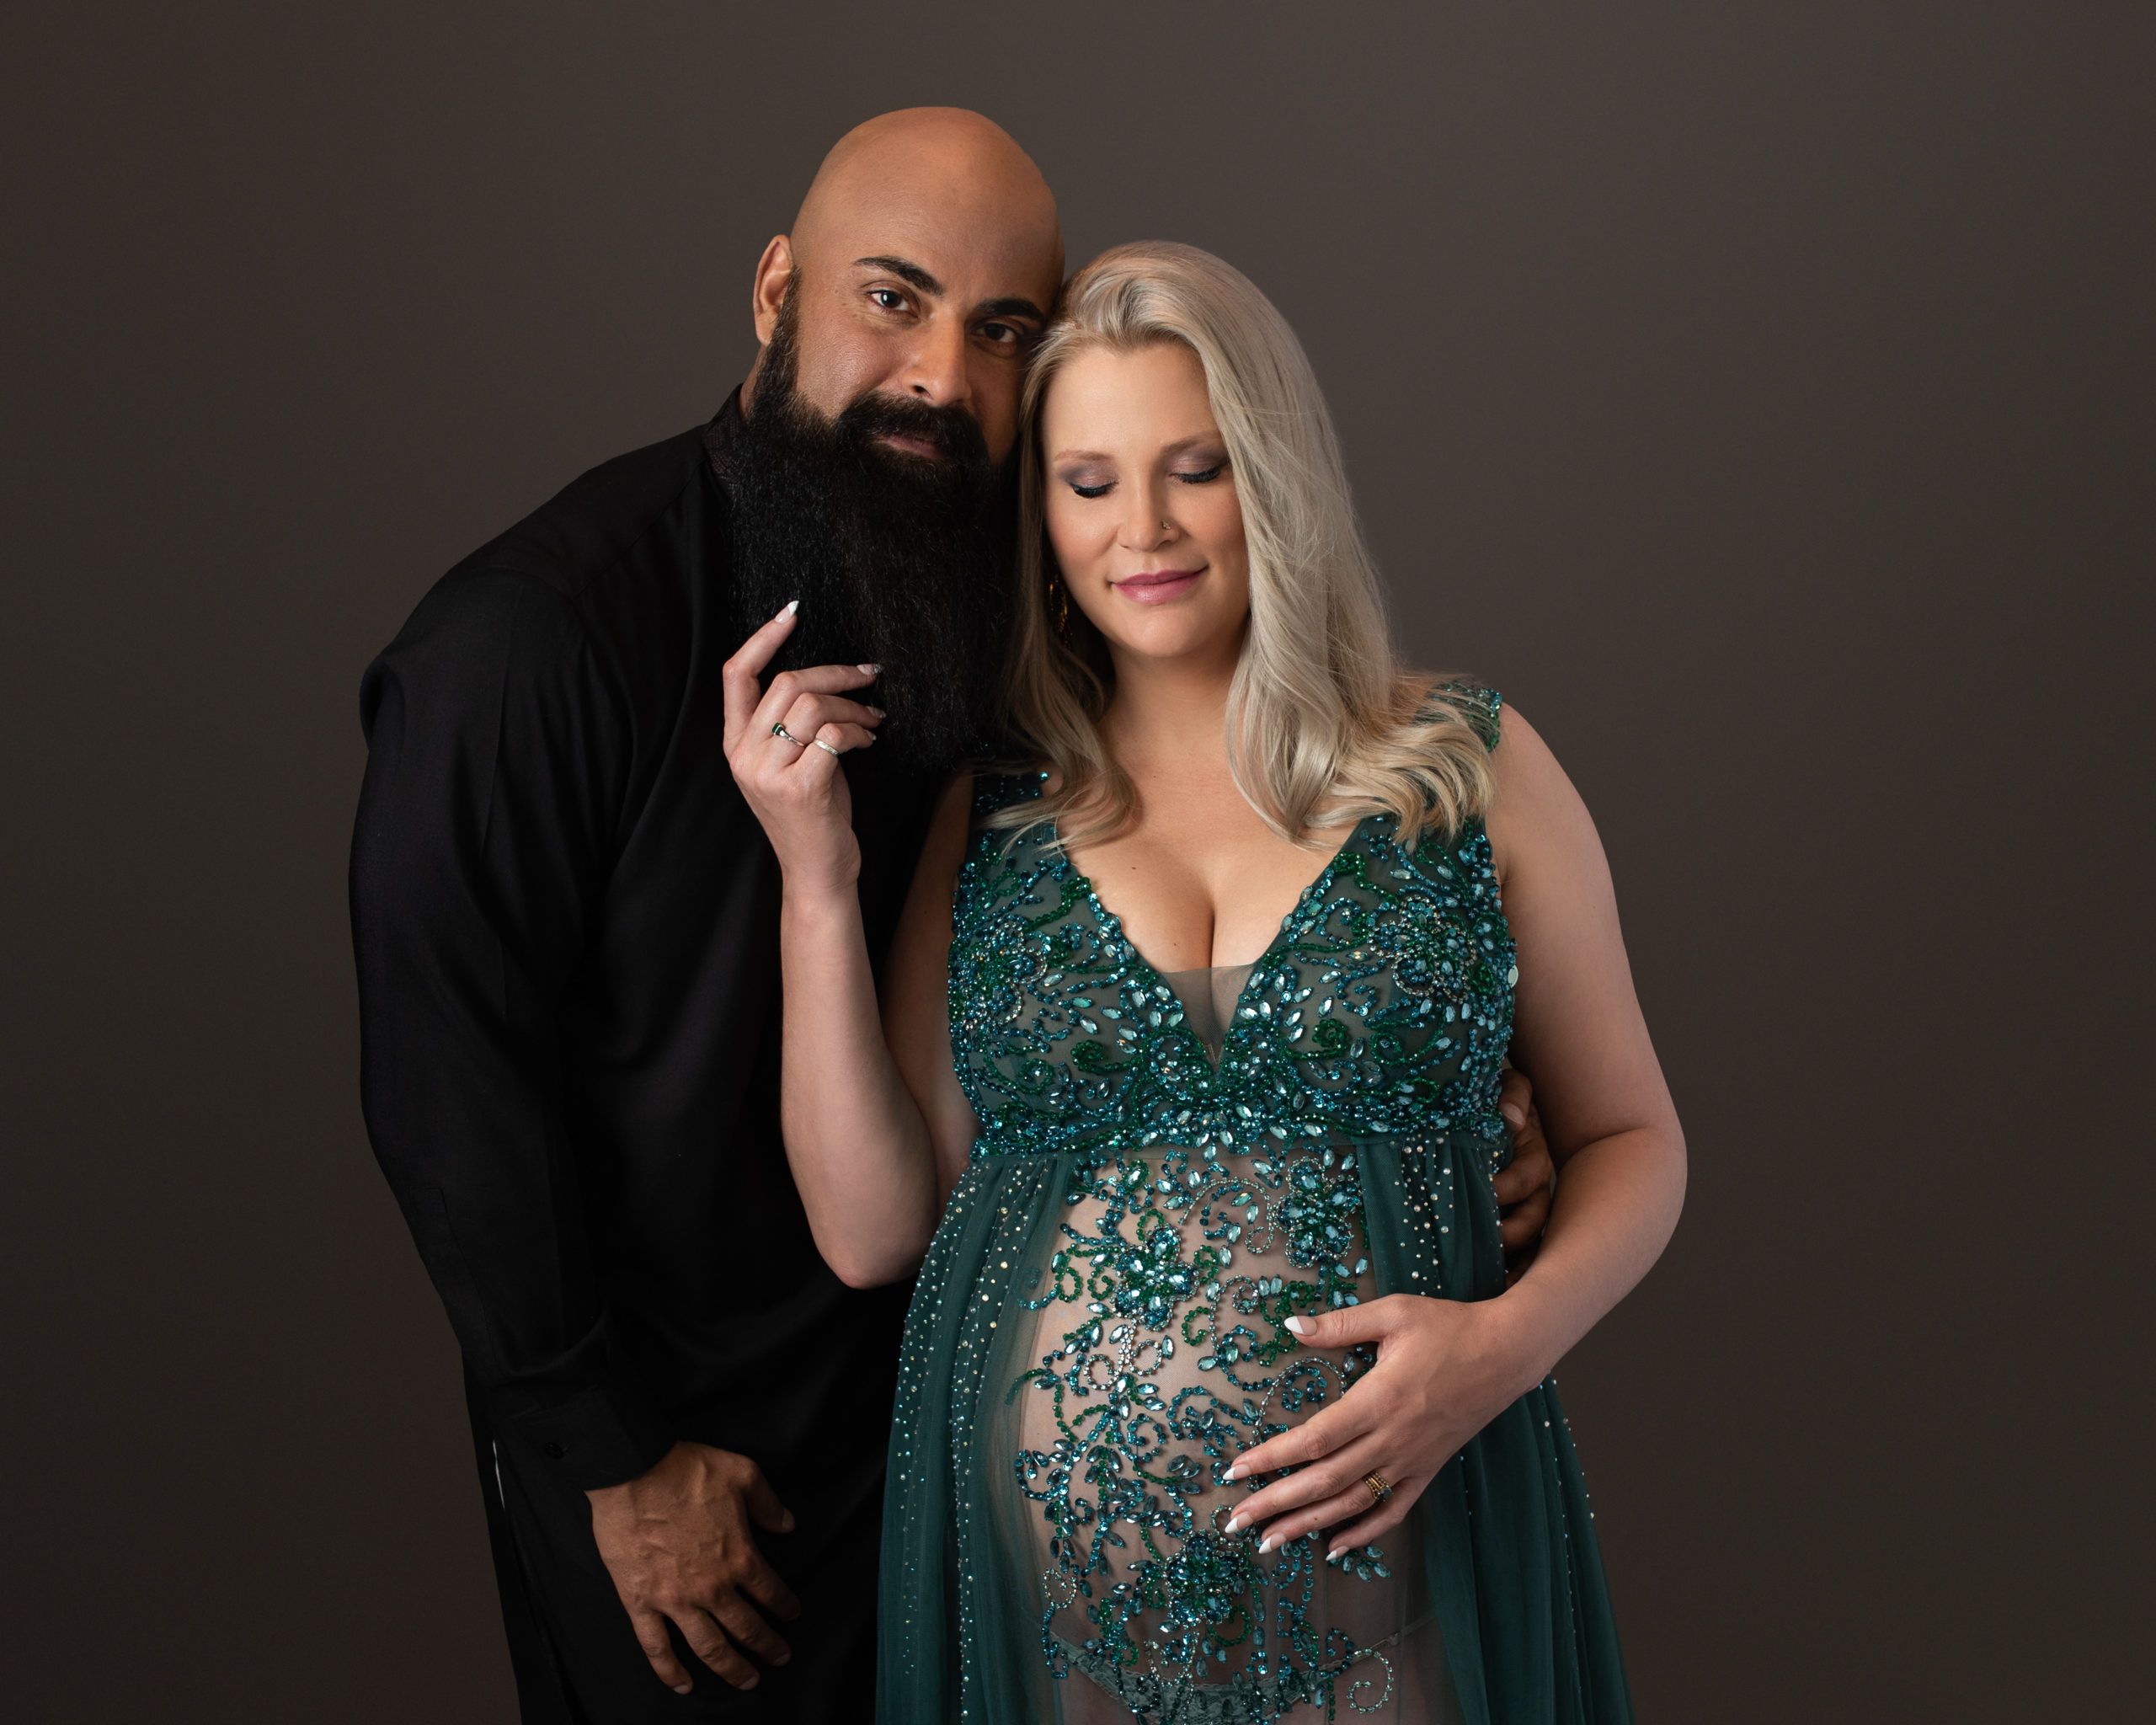 new parents awaiting the arrival of their little one while wearing black and green